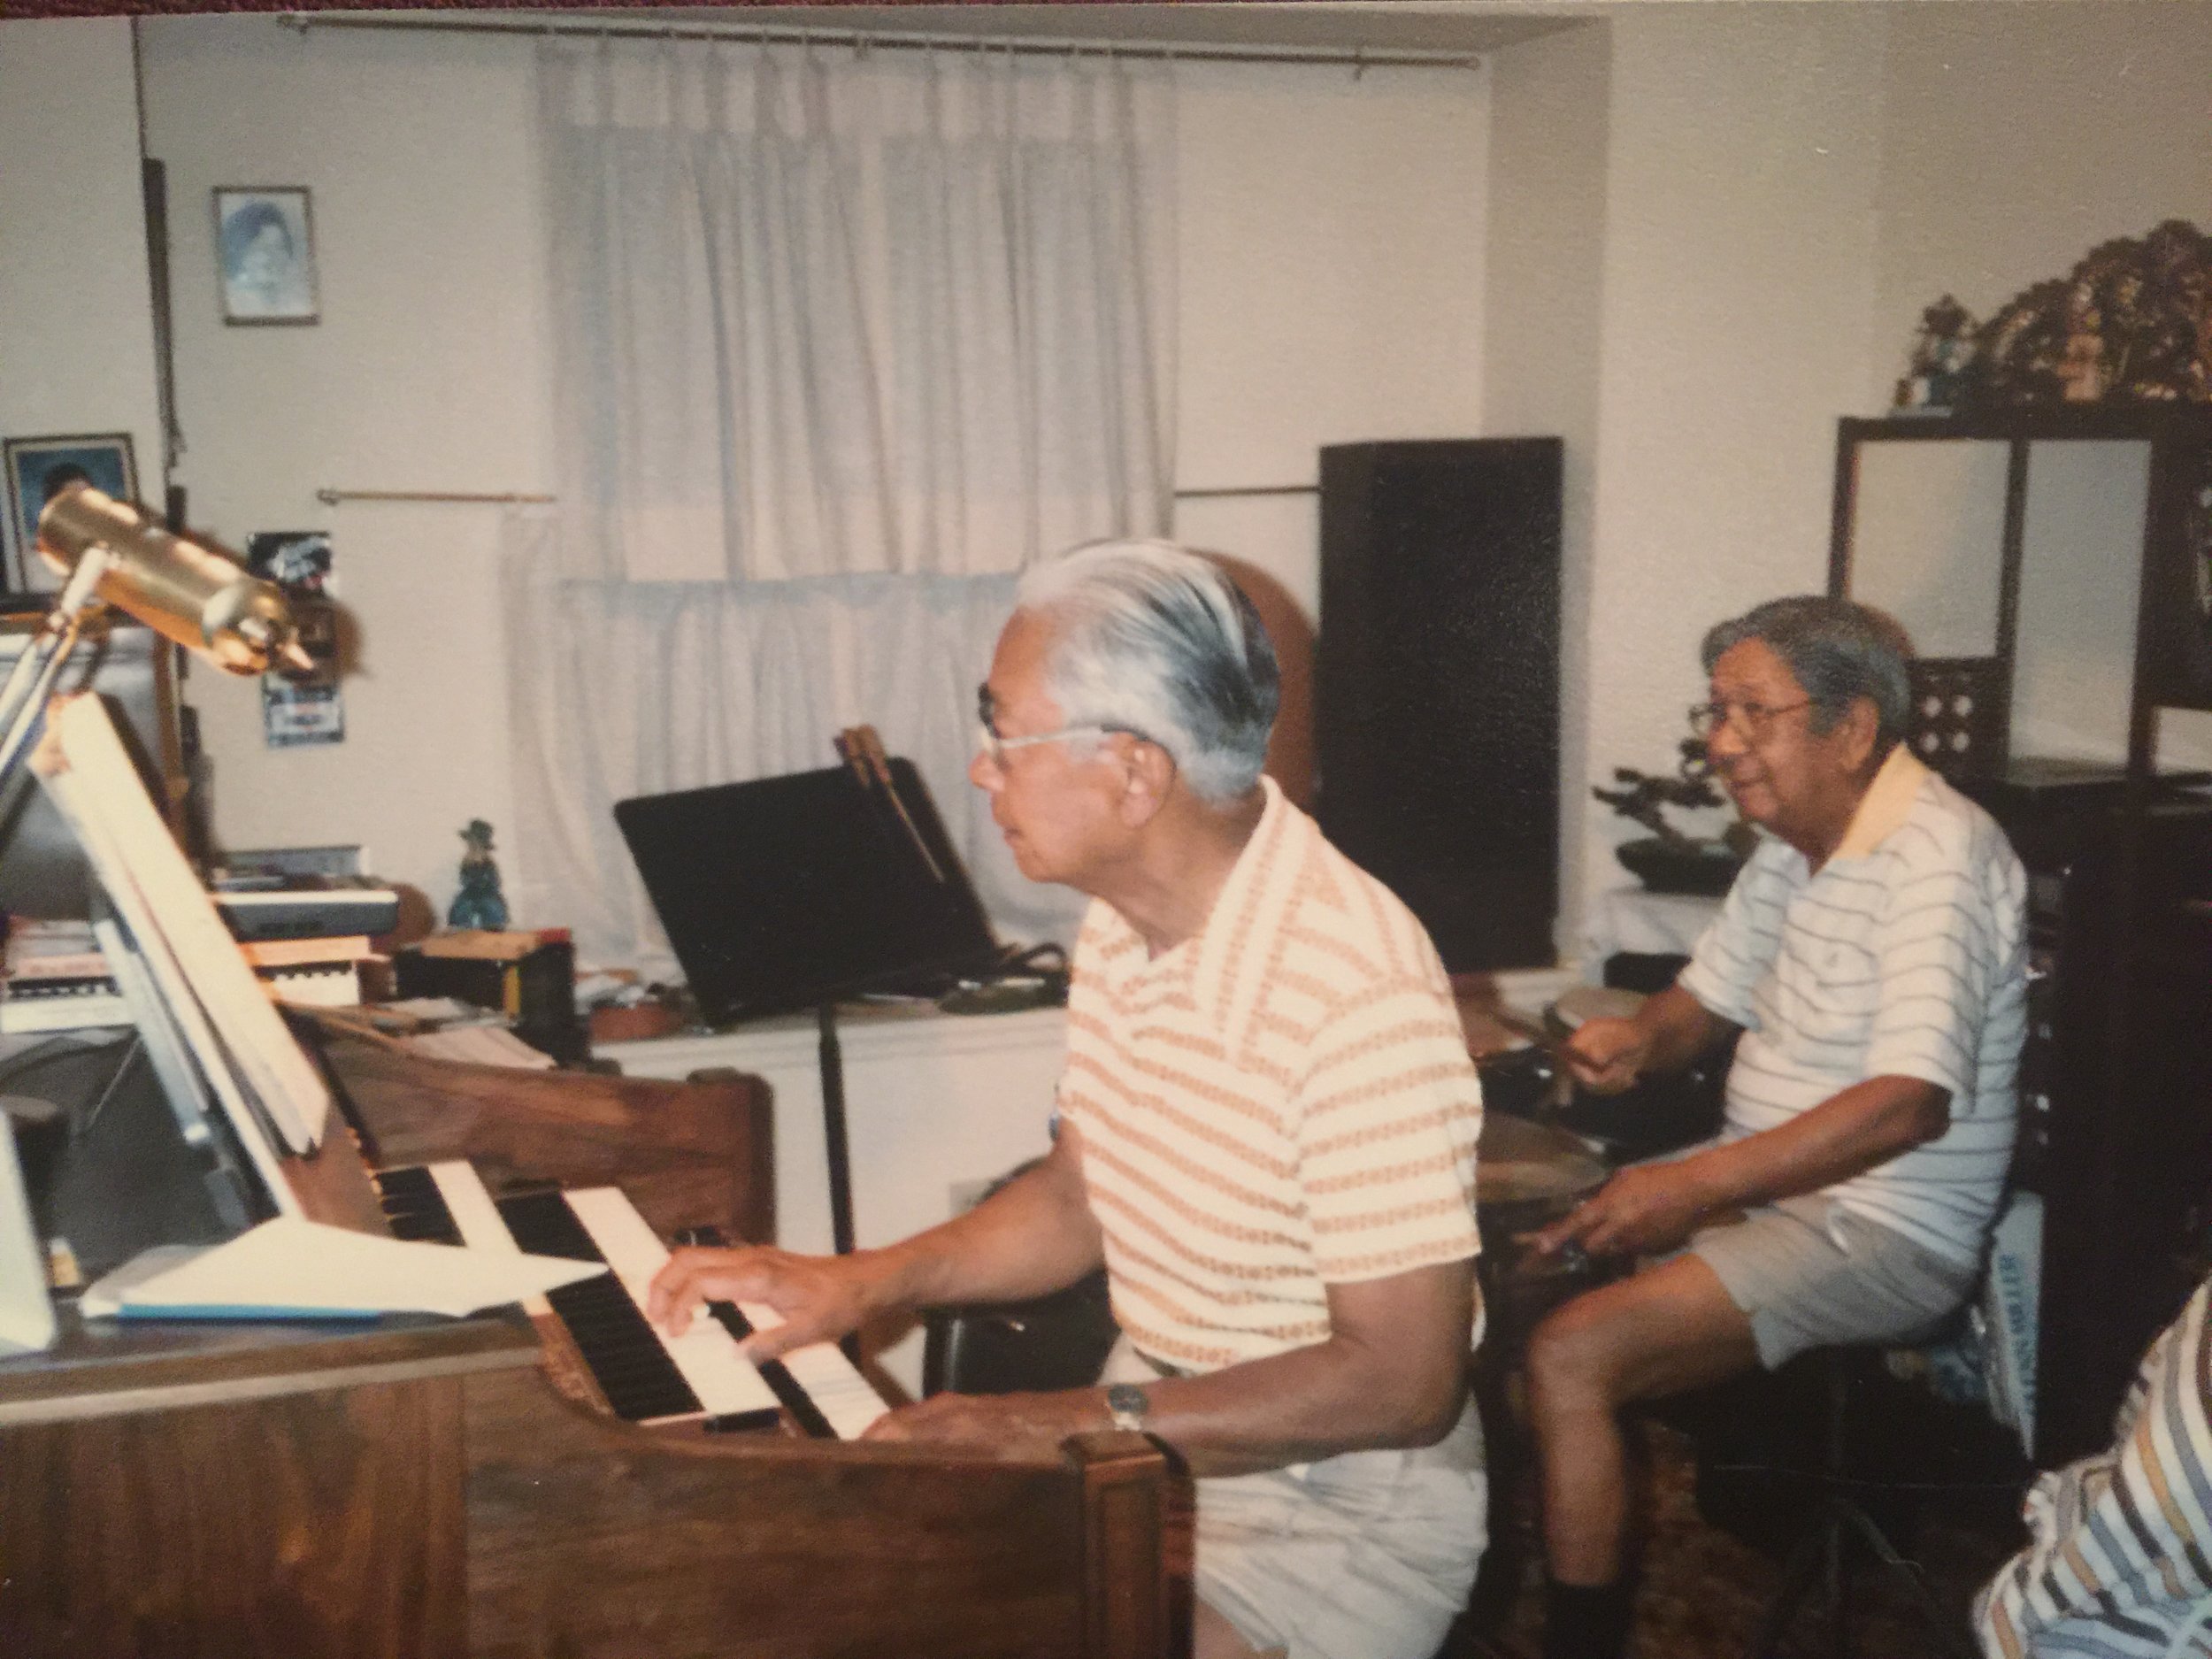 Dad and Sandor jamming out in Sandor's music room, where he taught drum and organ lessons.